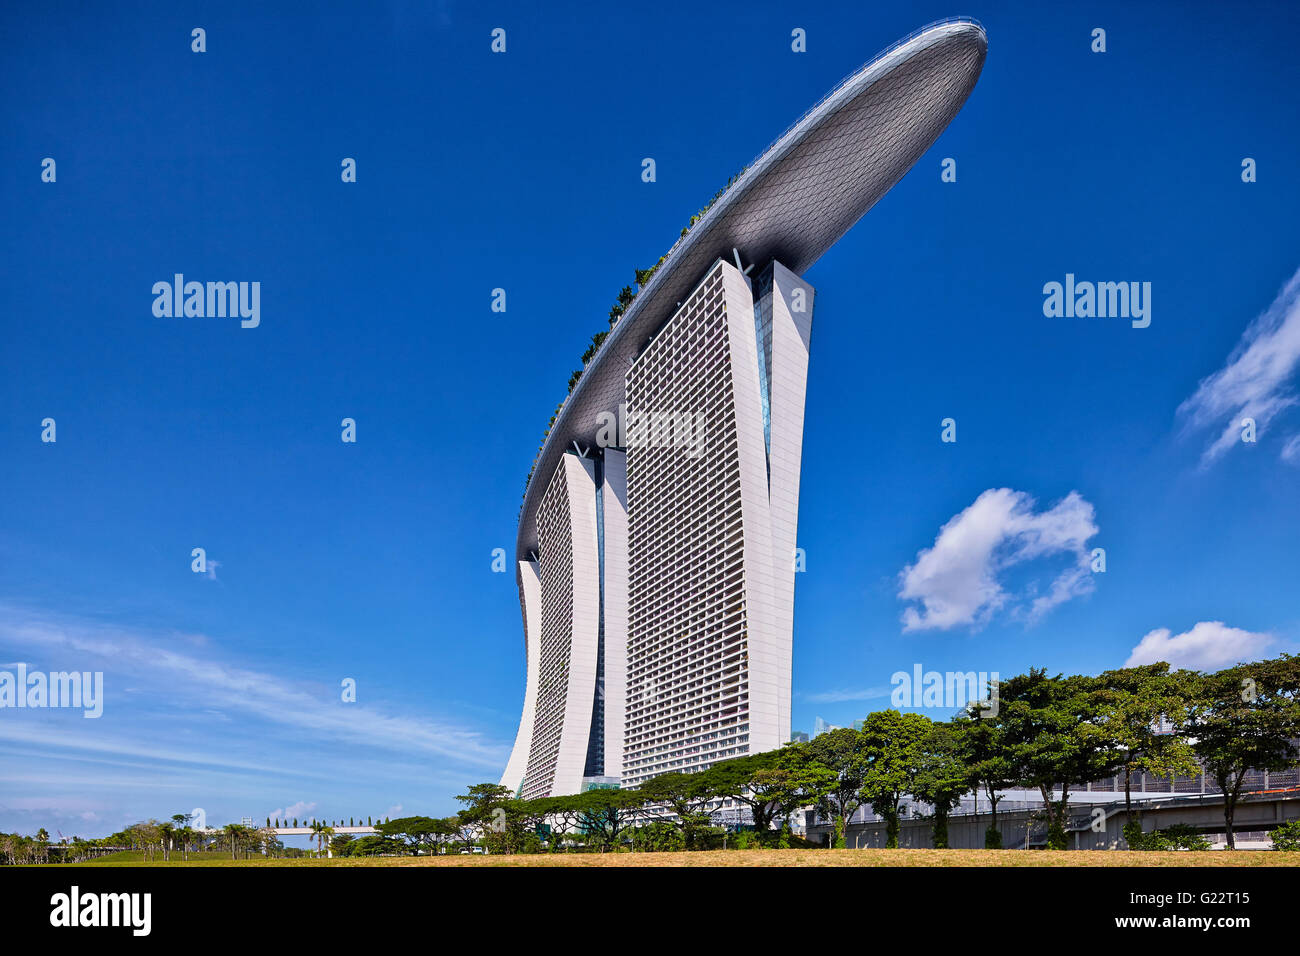 Exterior day view of Marina Bay Sands from Gardens by the Bay, Marina Bay, Singapore on July 22, 2012. Stock Photo